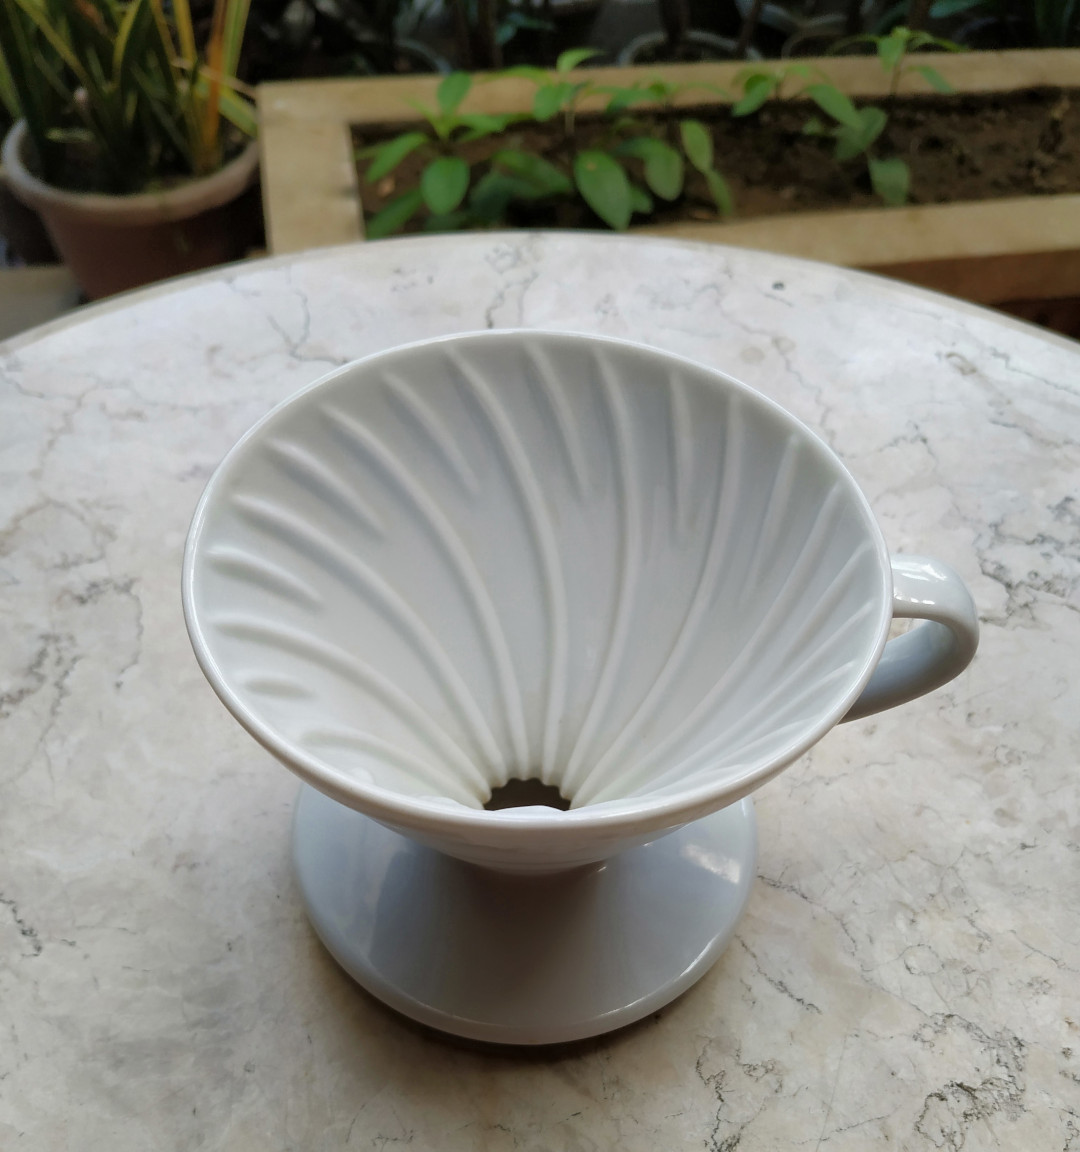 Cafellissimo Paperless Pour Over Review